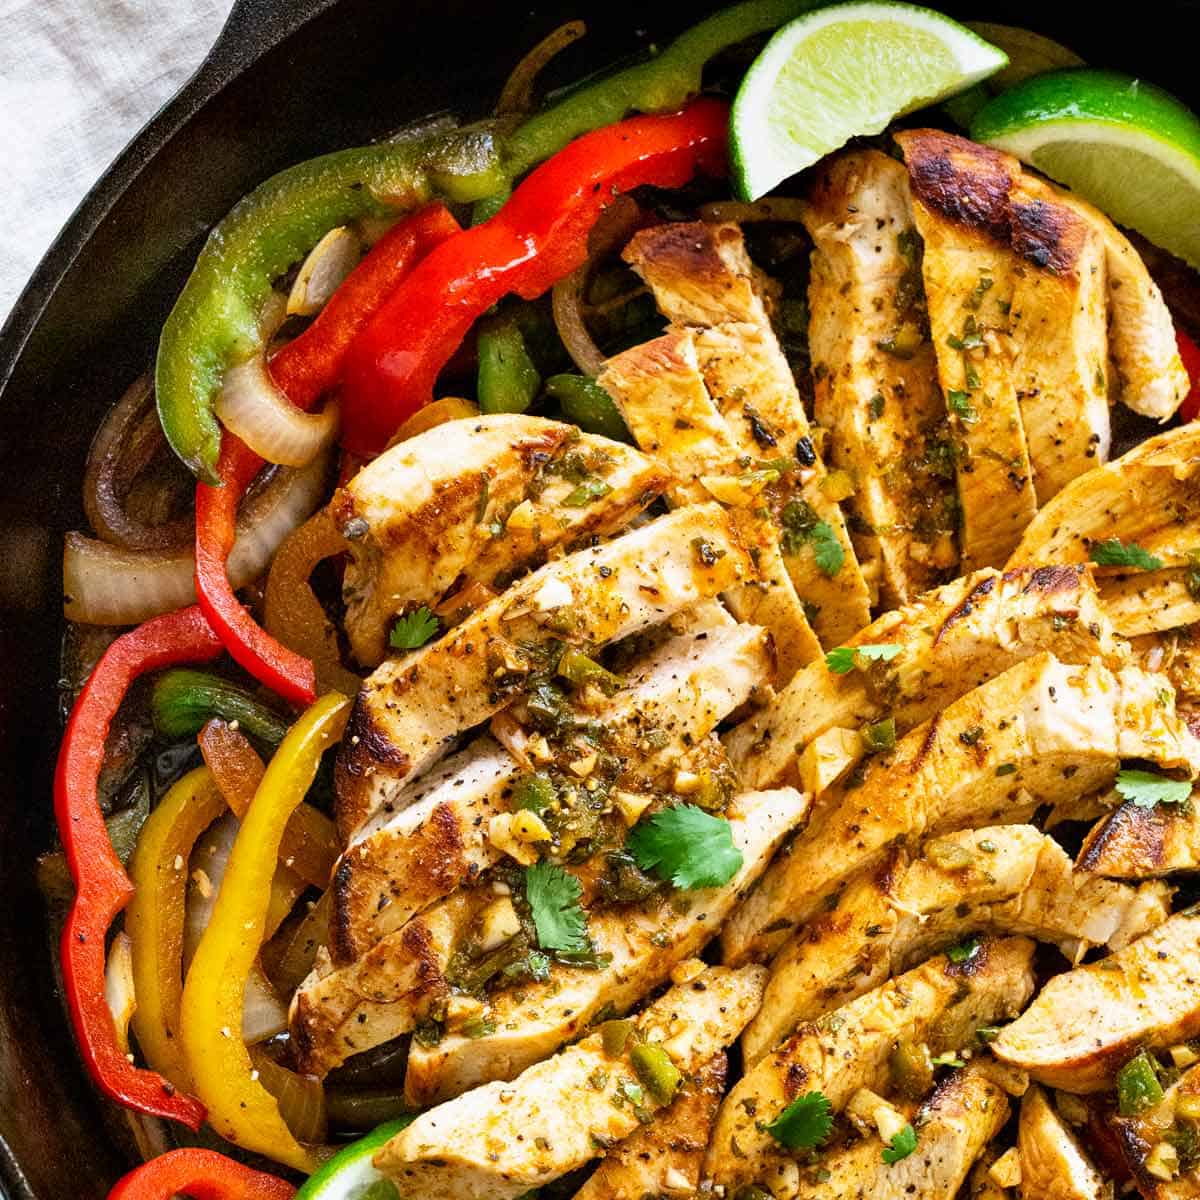 In 1977, fajitas were a popular American food trend. In Tex-Mex cuisine, fajitas are defined as “any stripped grilled meat with stripped peppers and onions that is usually served on a flour or corn tortilla.”